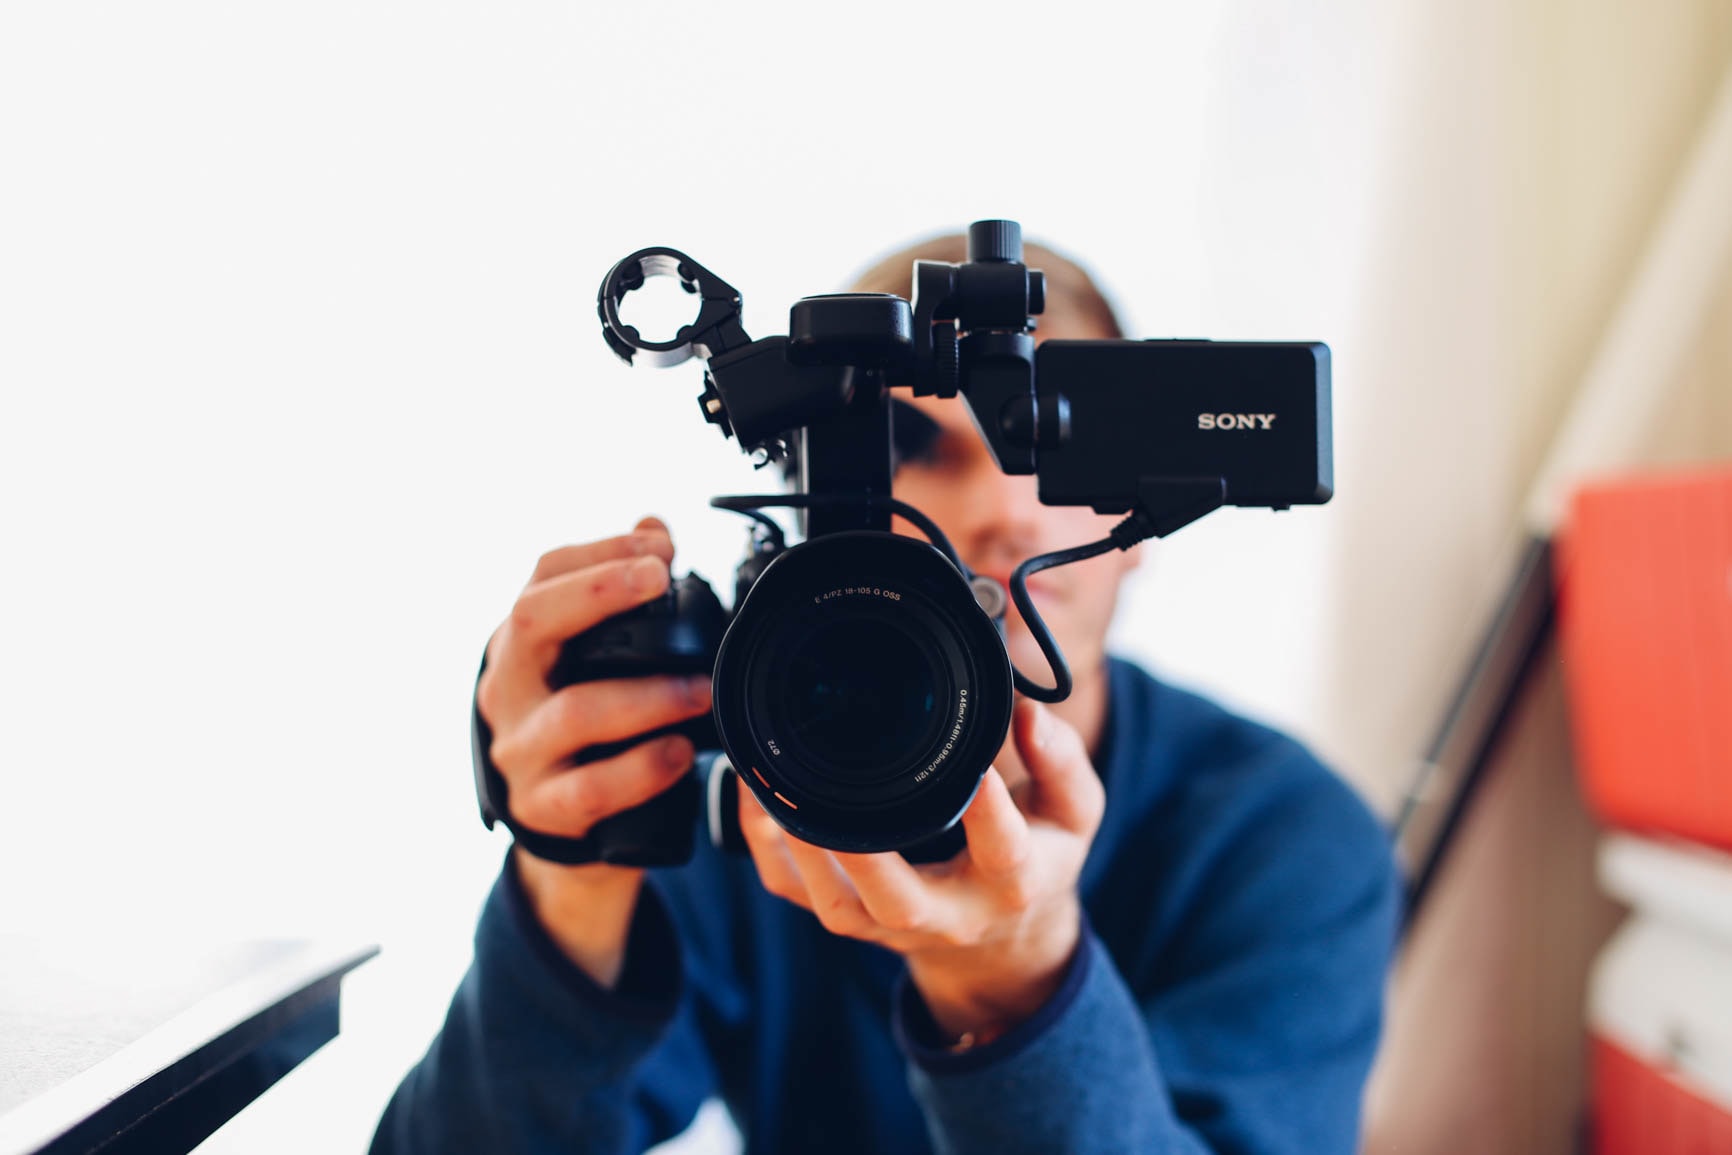 Video Resume is the New Way to Show Off Your Skills and Get Hired in 2021